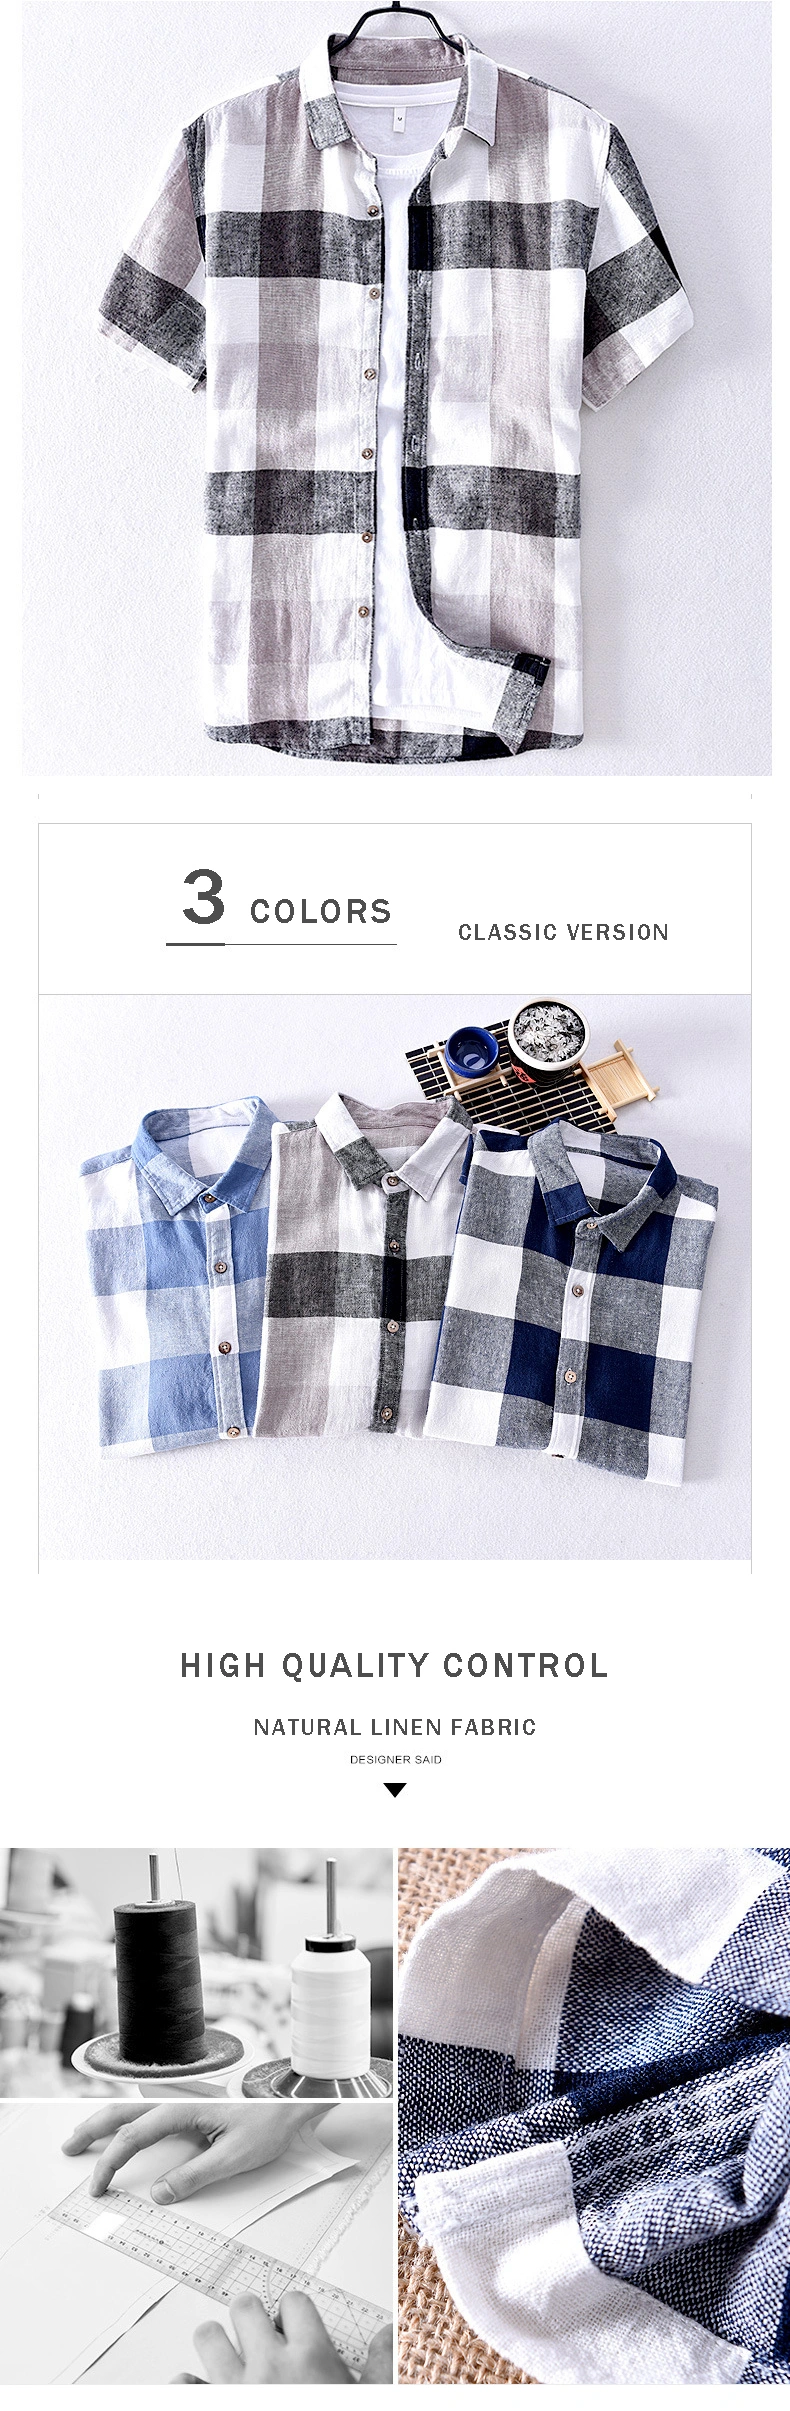 High Quality Breathable Cotton Men's Plaid Shirt Slim Fit Male Casual Short Sleeved Shirts